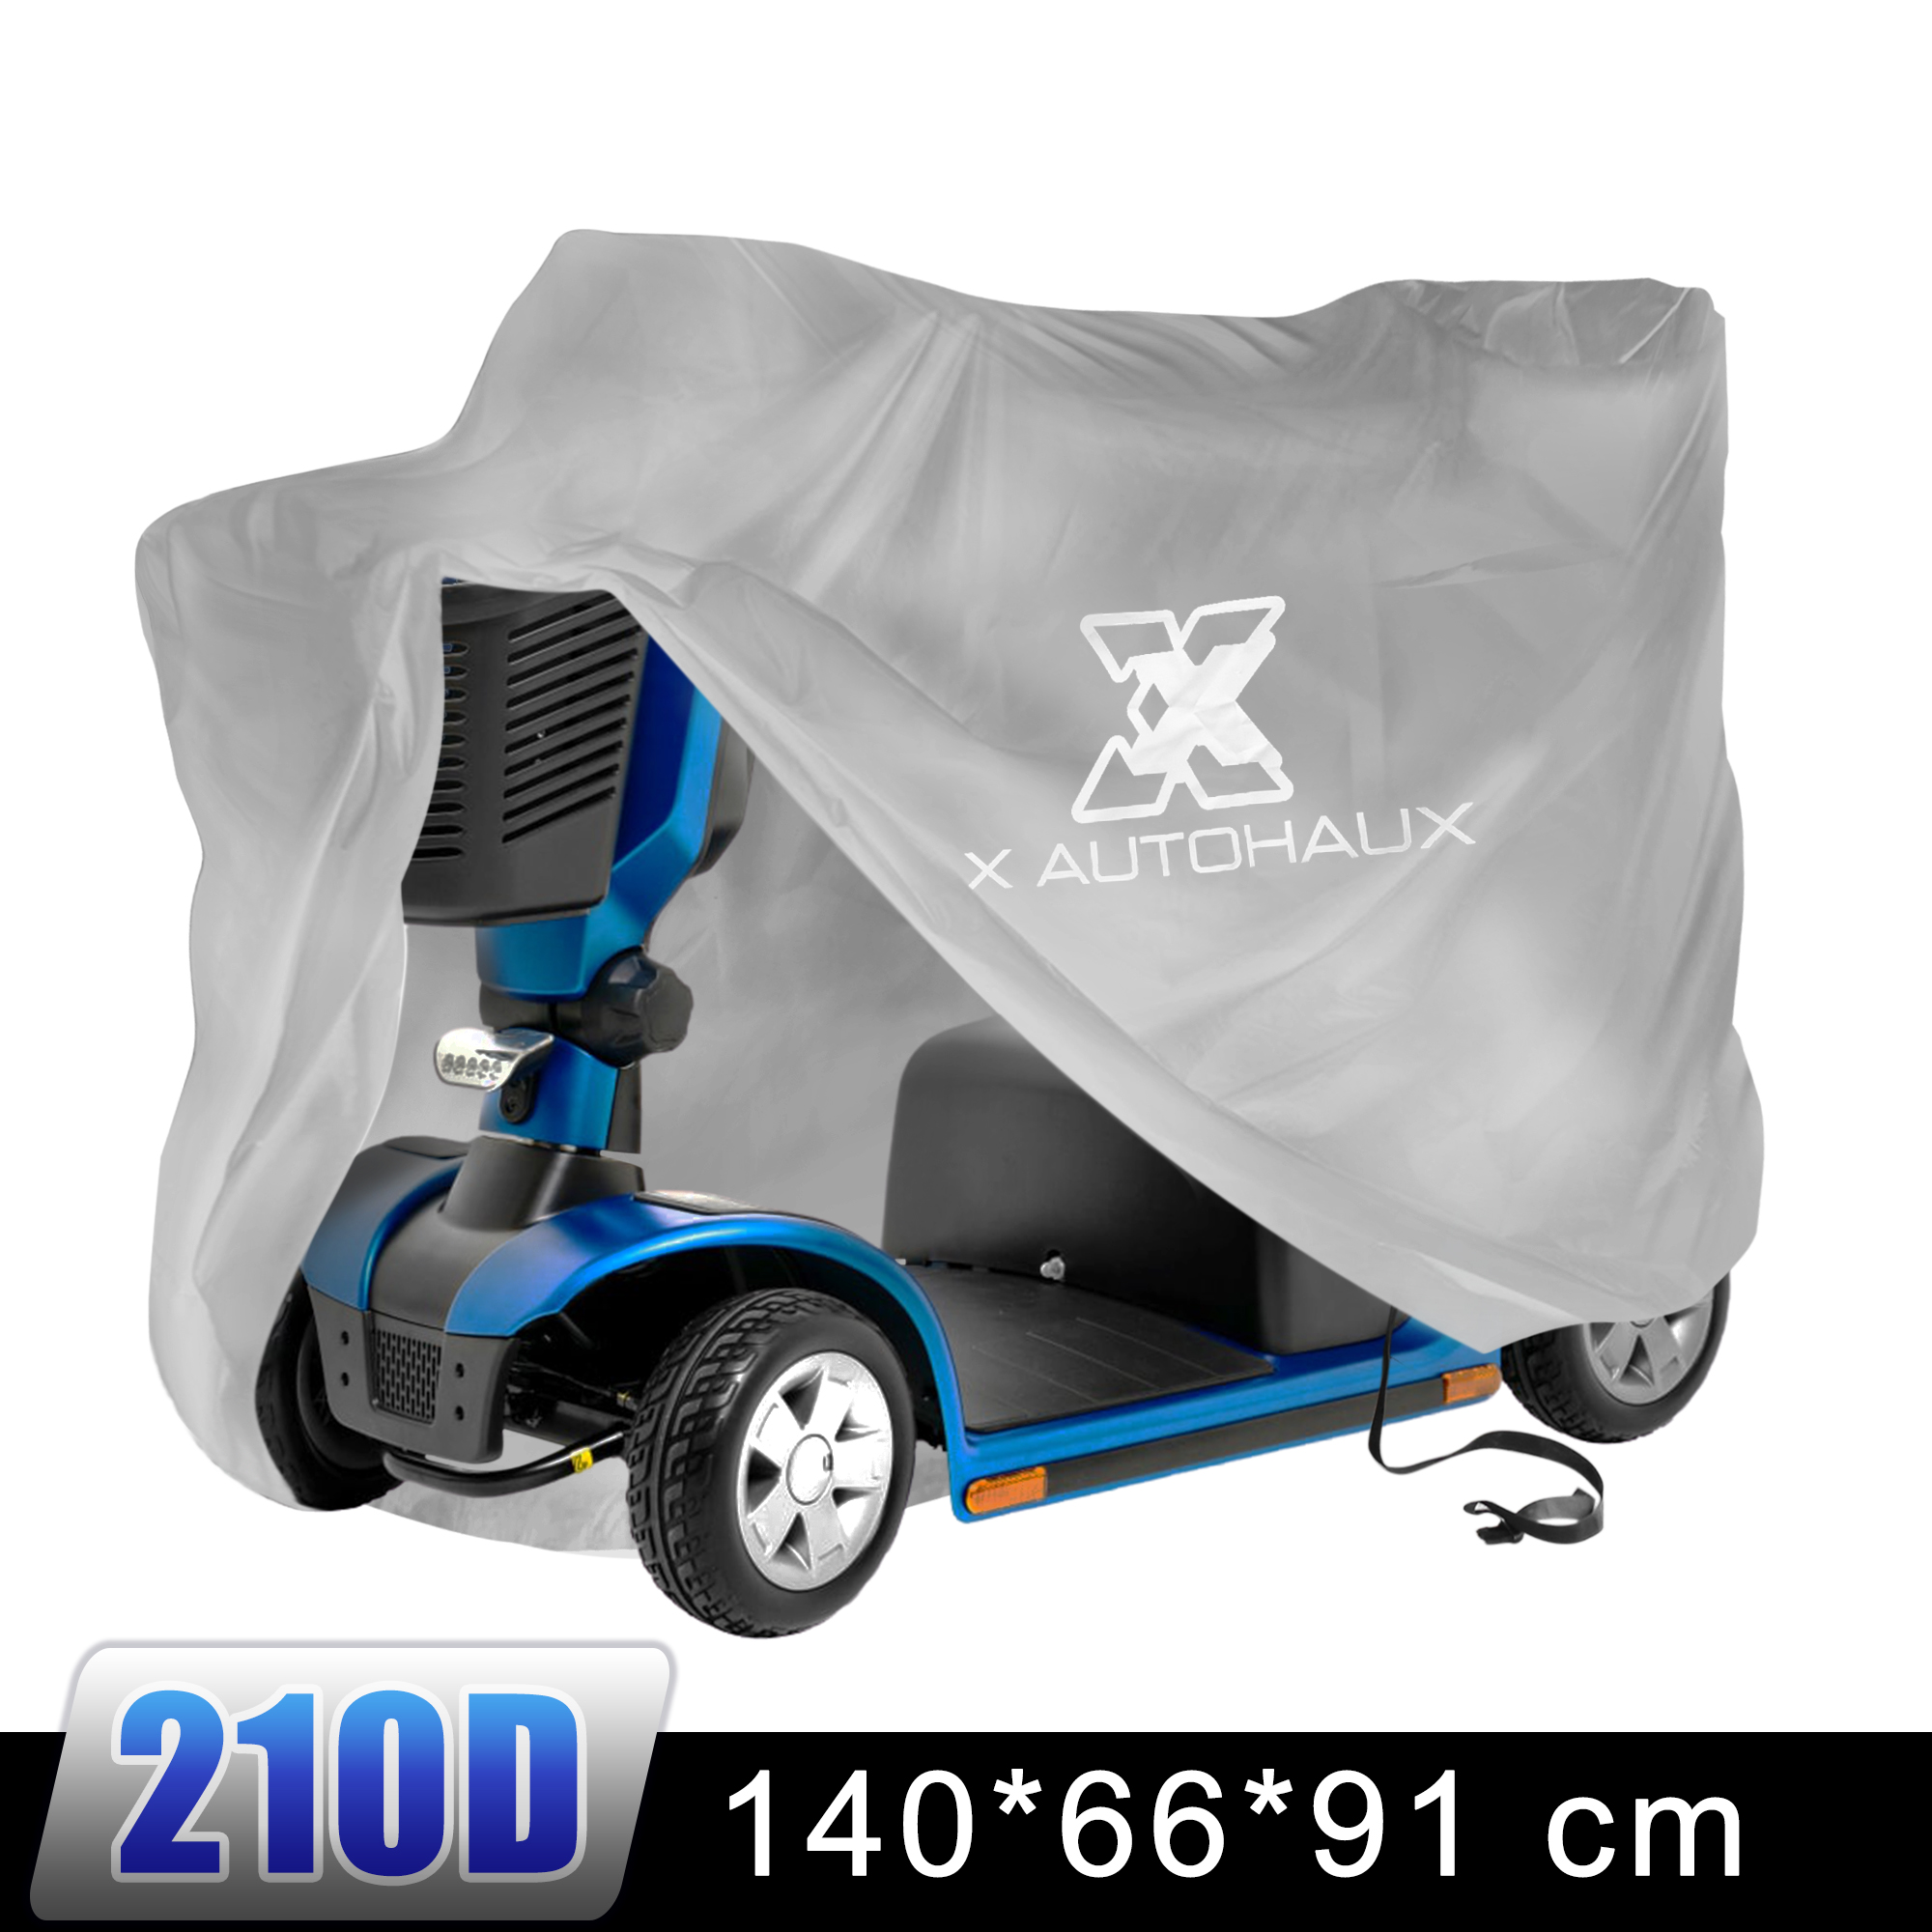 Unique Bargains 55"x26"x36" Motorbike Mobility Scooter Cover Waterproof Rain Protection Gray